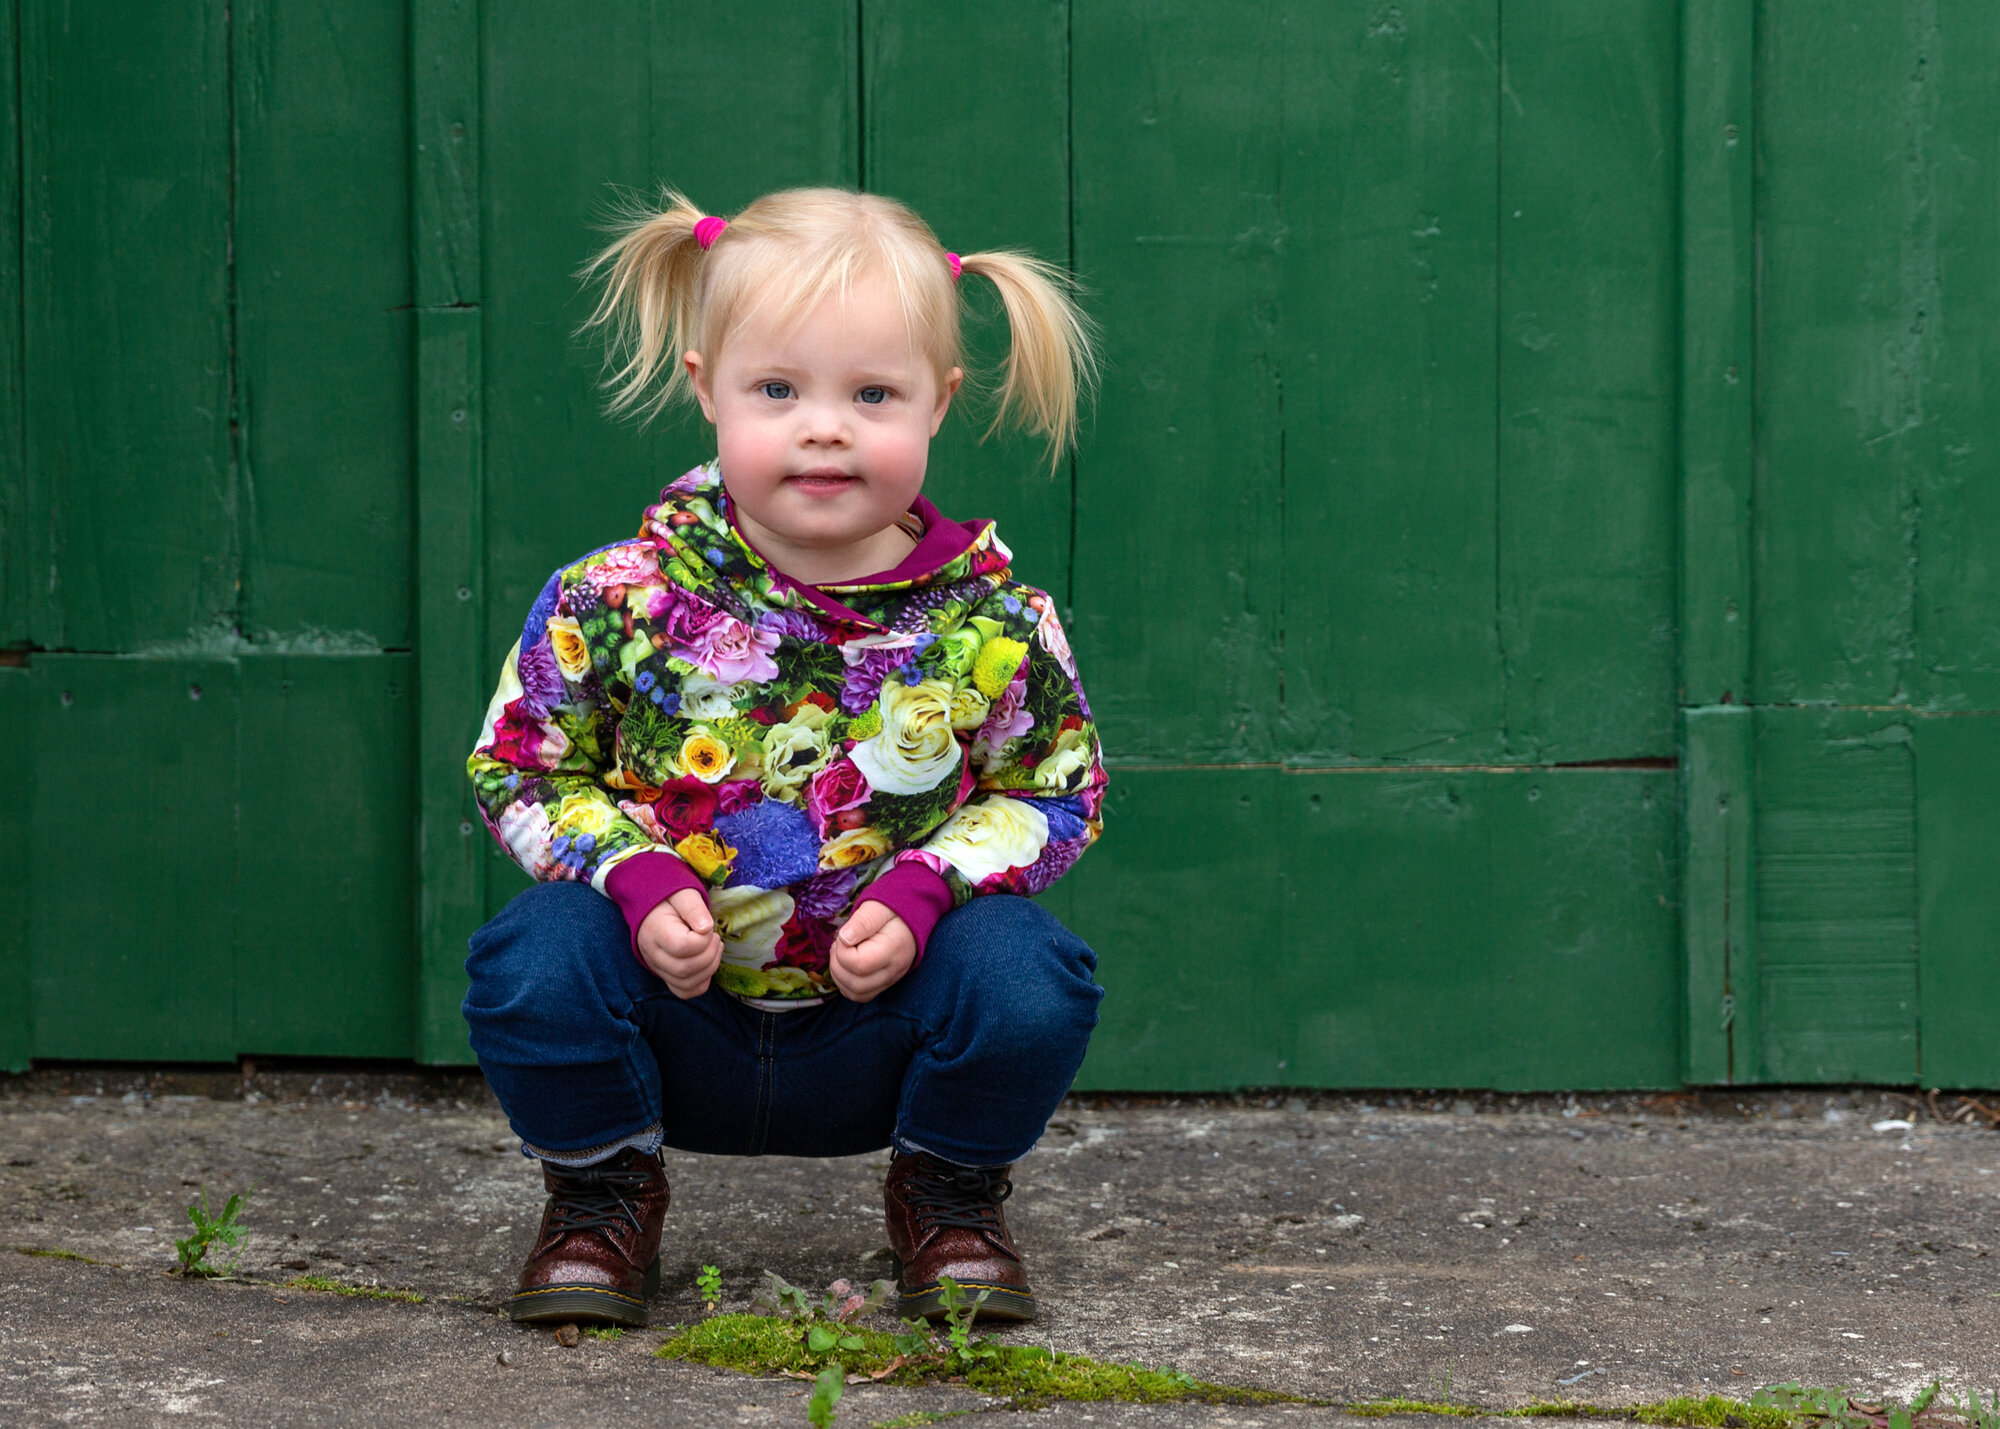 children's photographer in caerphilly, near cardiff south wales